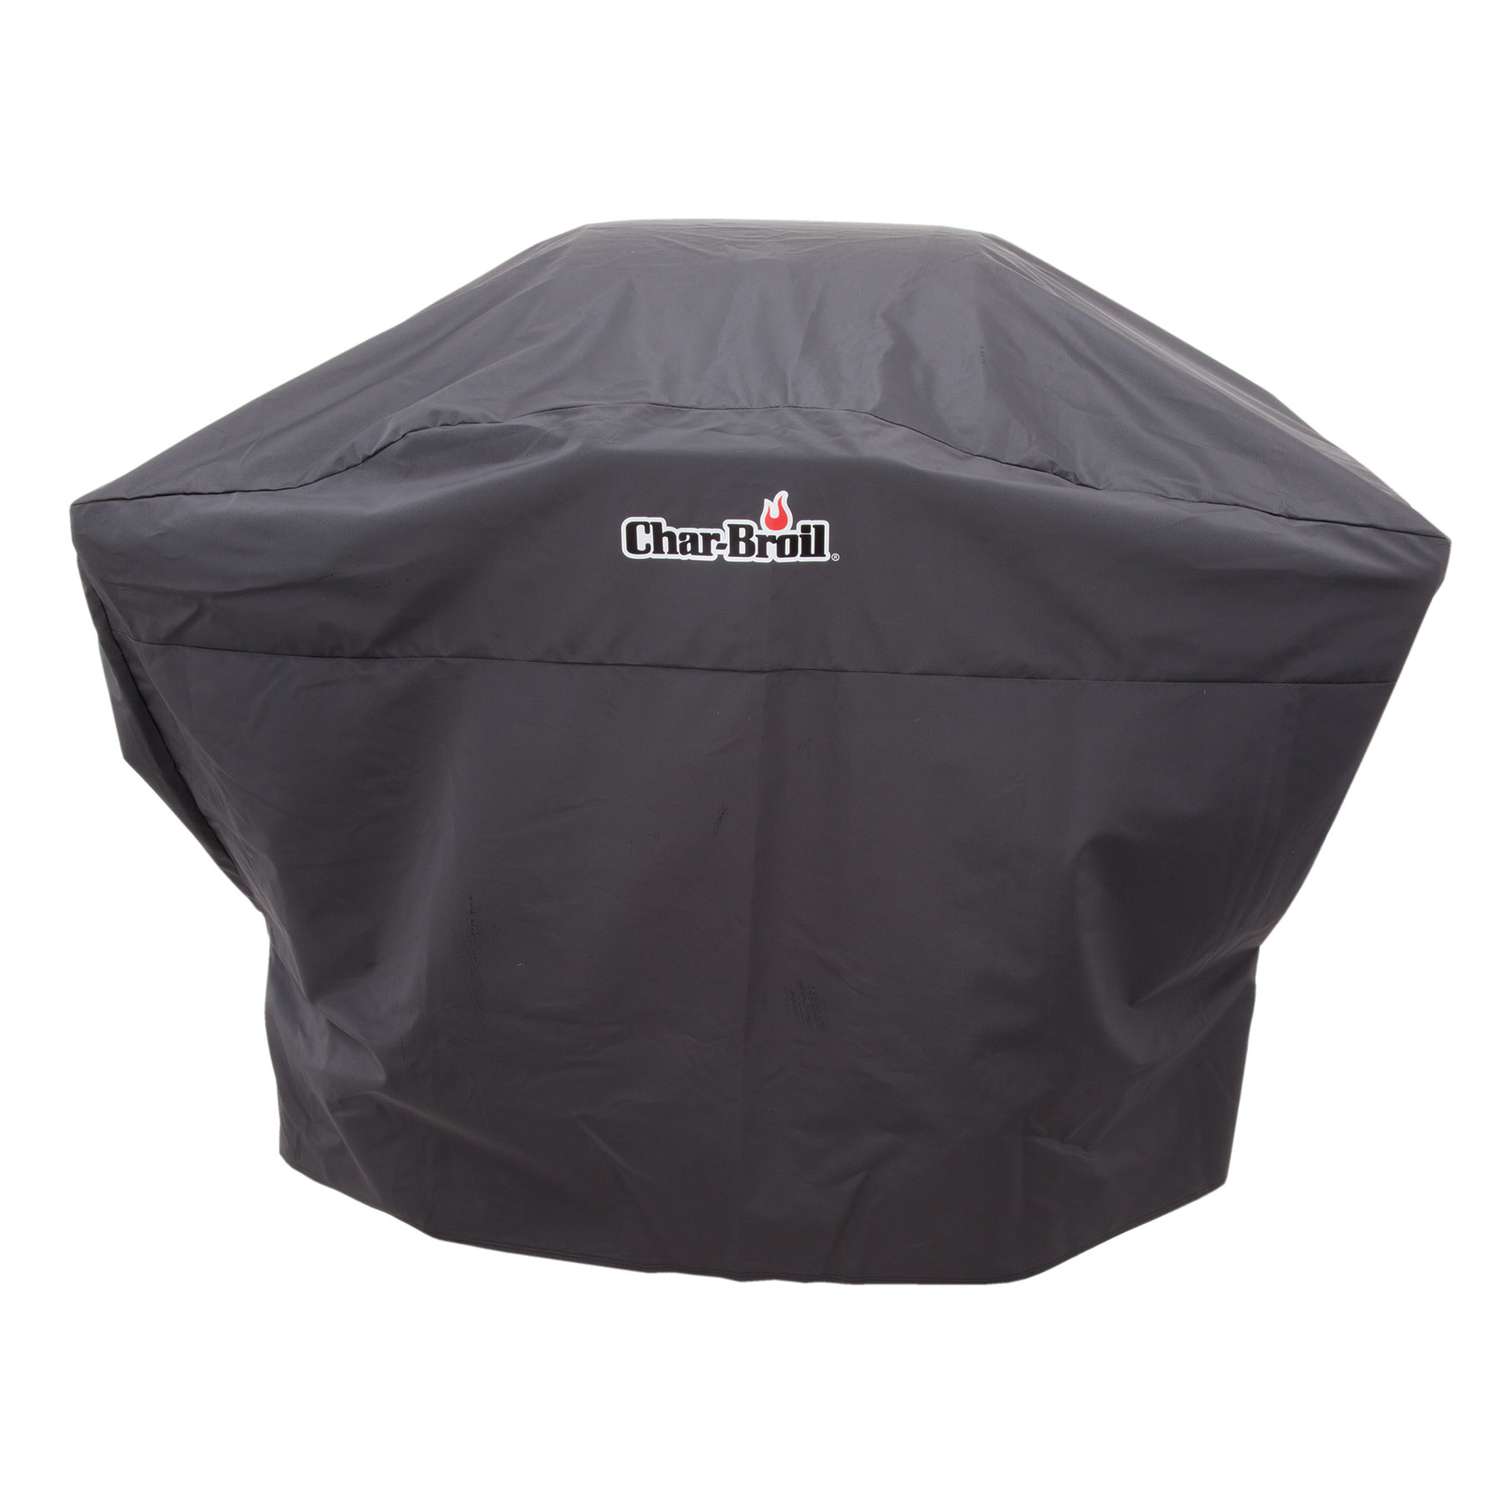 Onward Grill Pro 84156 56" 6 Gauge All Weather Grill Cover W 